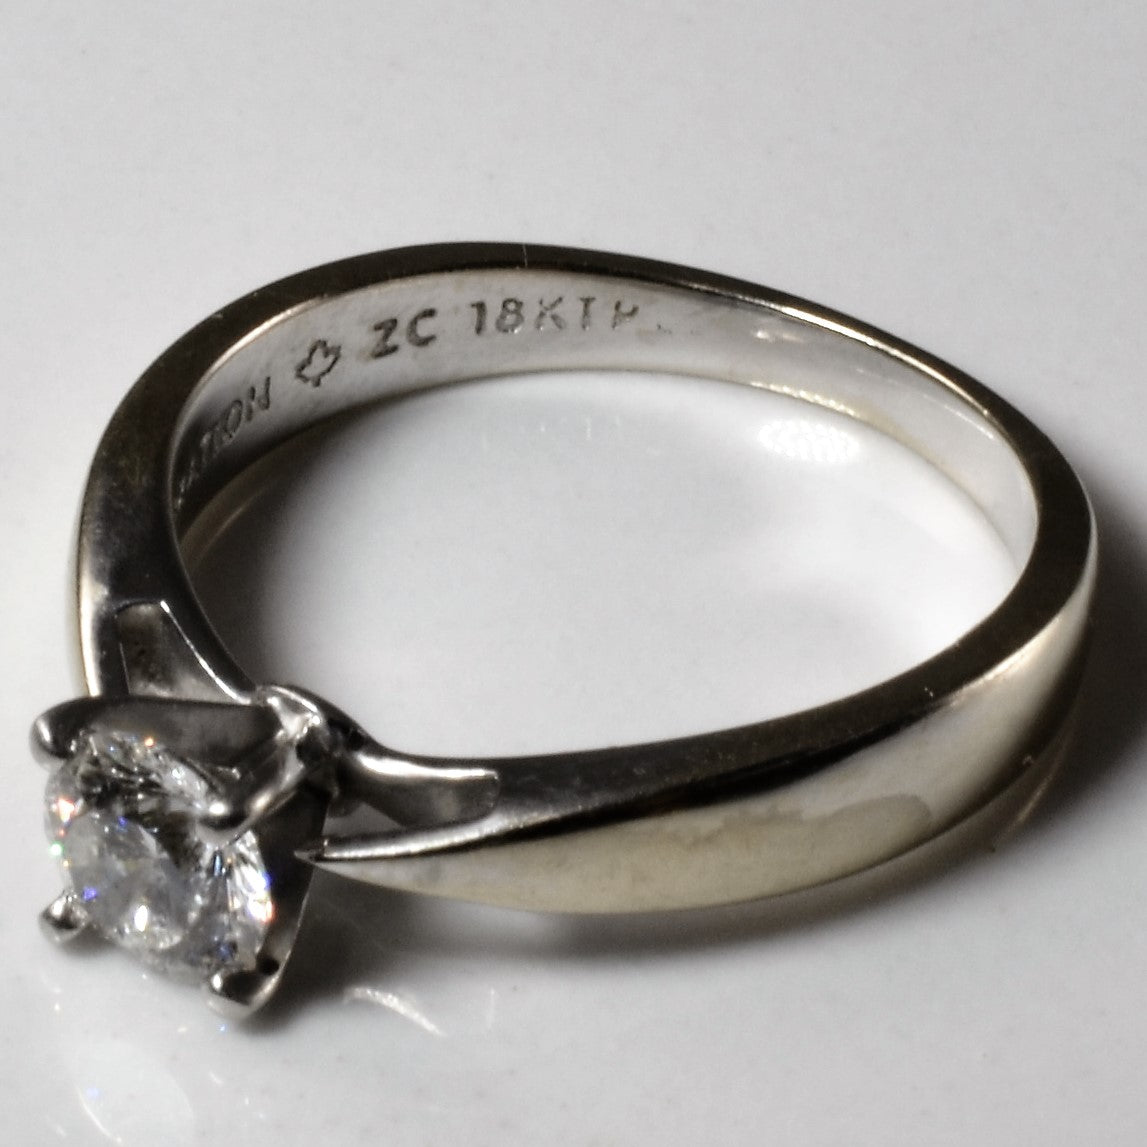 Tapered Solitaire Diamond Engagement Ring | 0.55ct | SZ 5.75 |